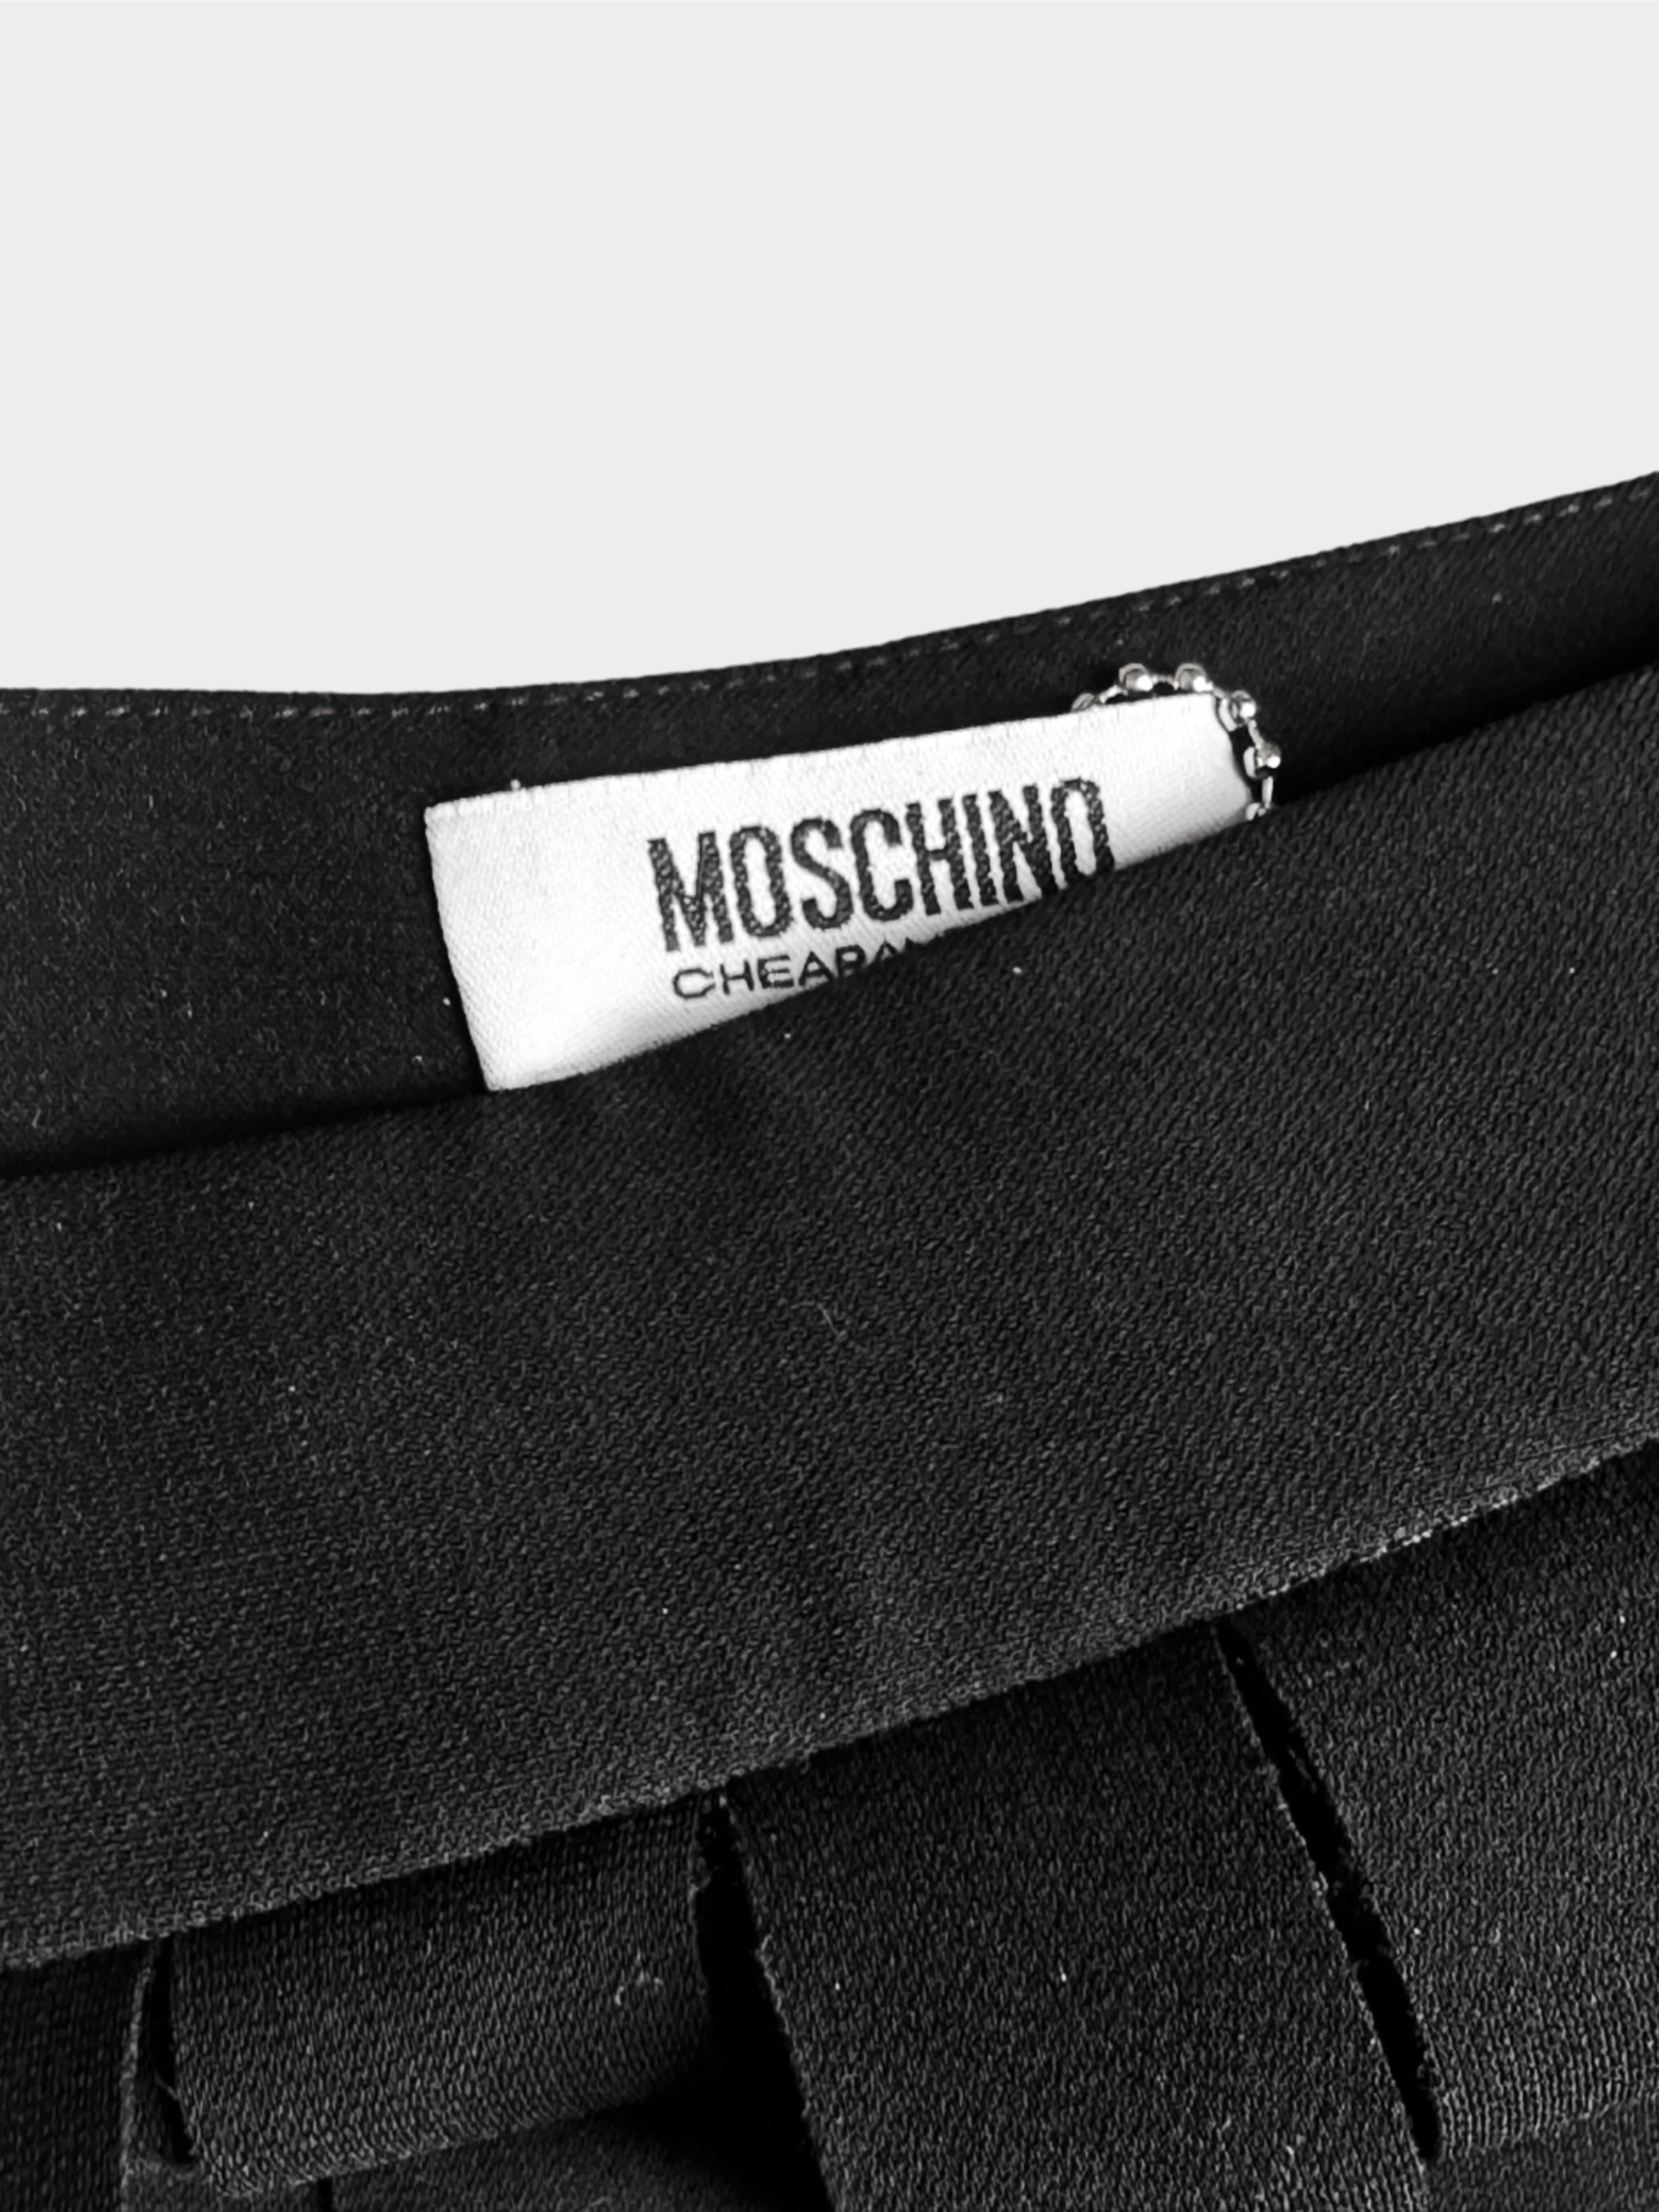 Moschino Cheap and Chic 1990s Black Fringed Shorts